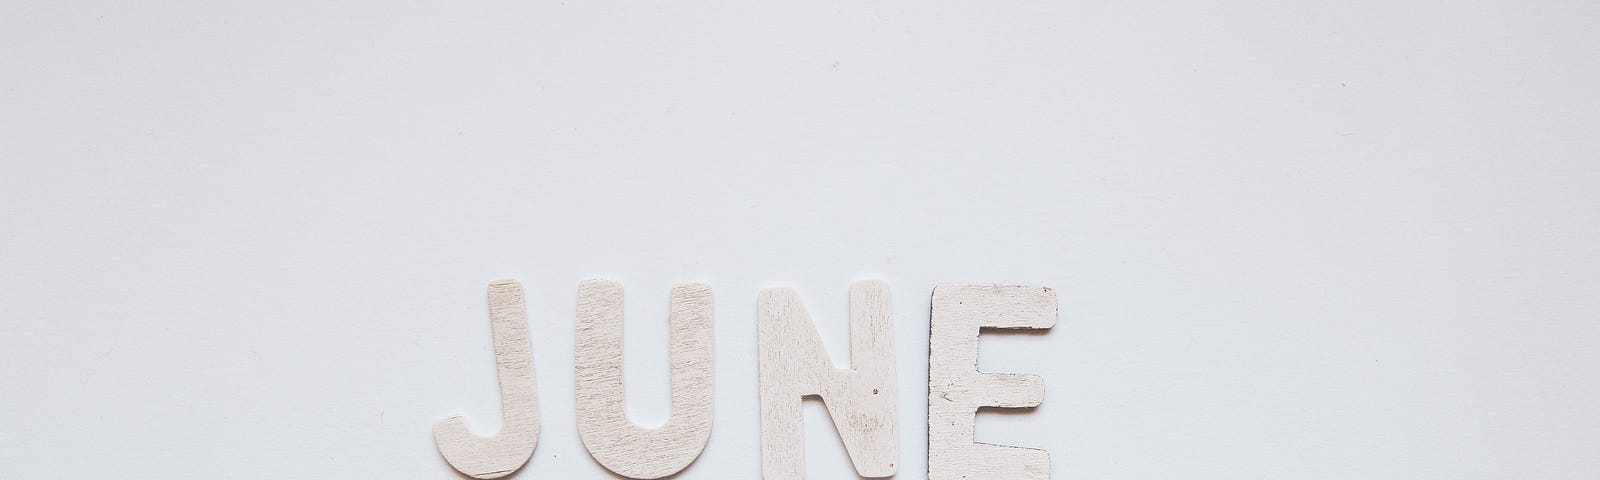 June spelled out in light tan letters on a white background.